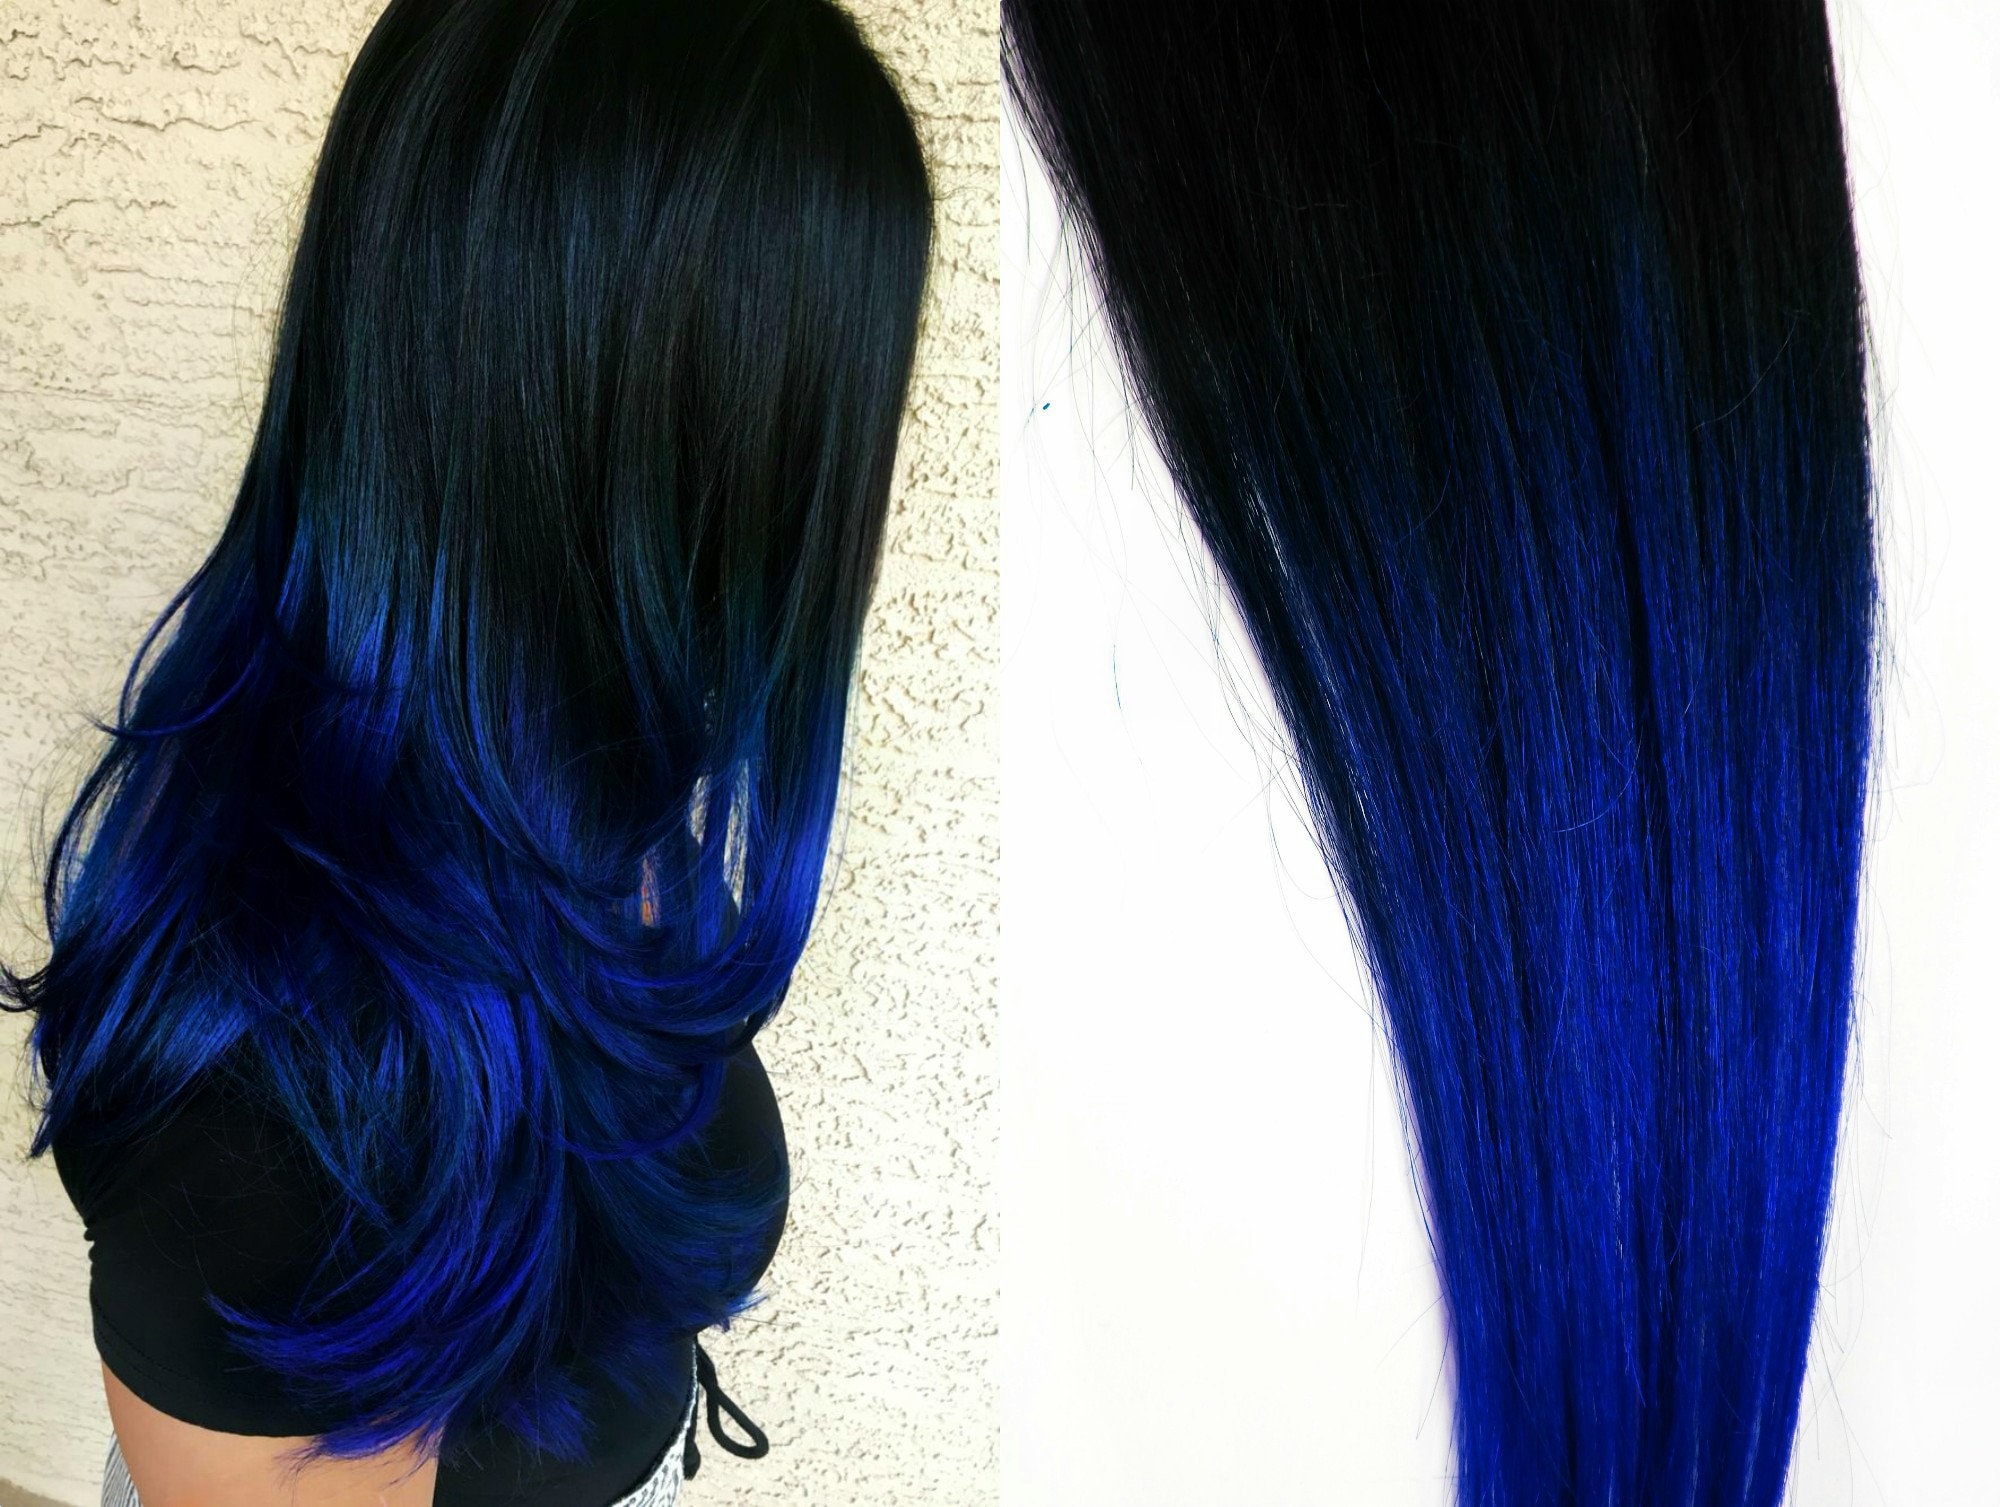 4. Pink and Blue Ombre Hair Extensions - wide 1